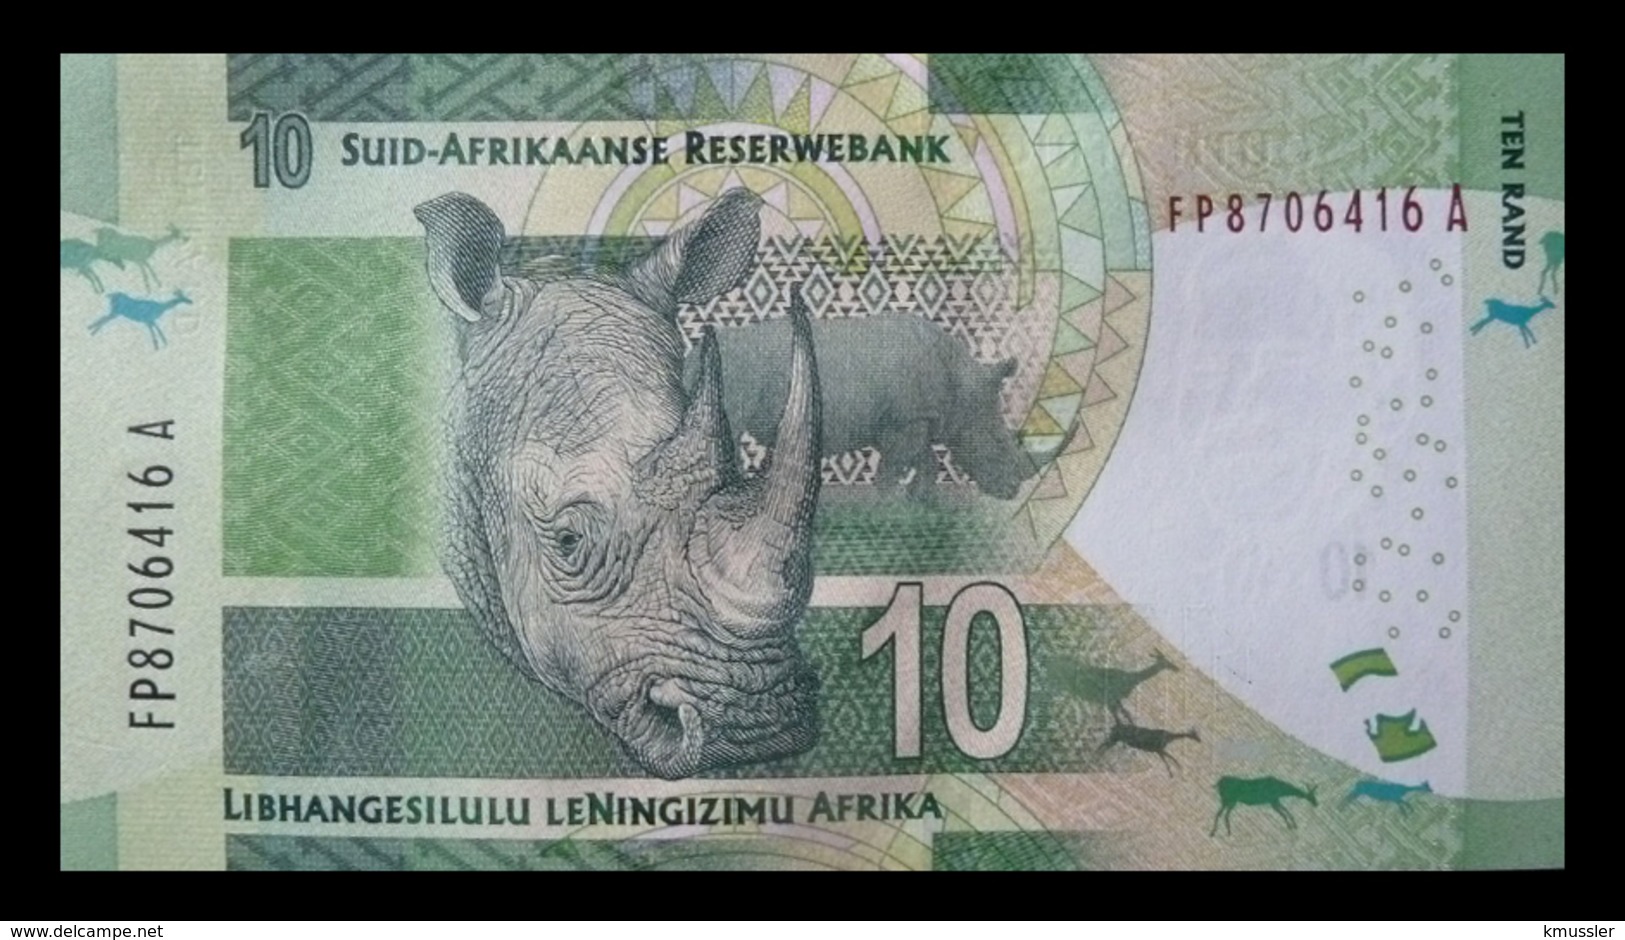 # # # Banknote Südafrika (South Africa) 10 Rand UNC # # # - South Africa